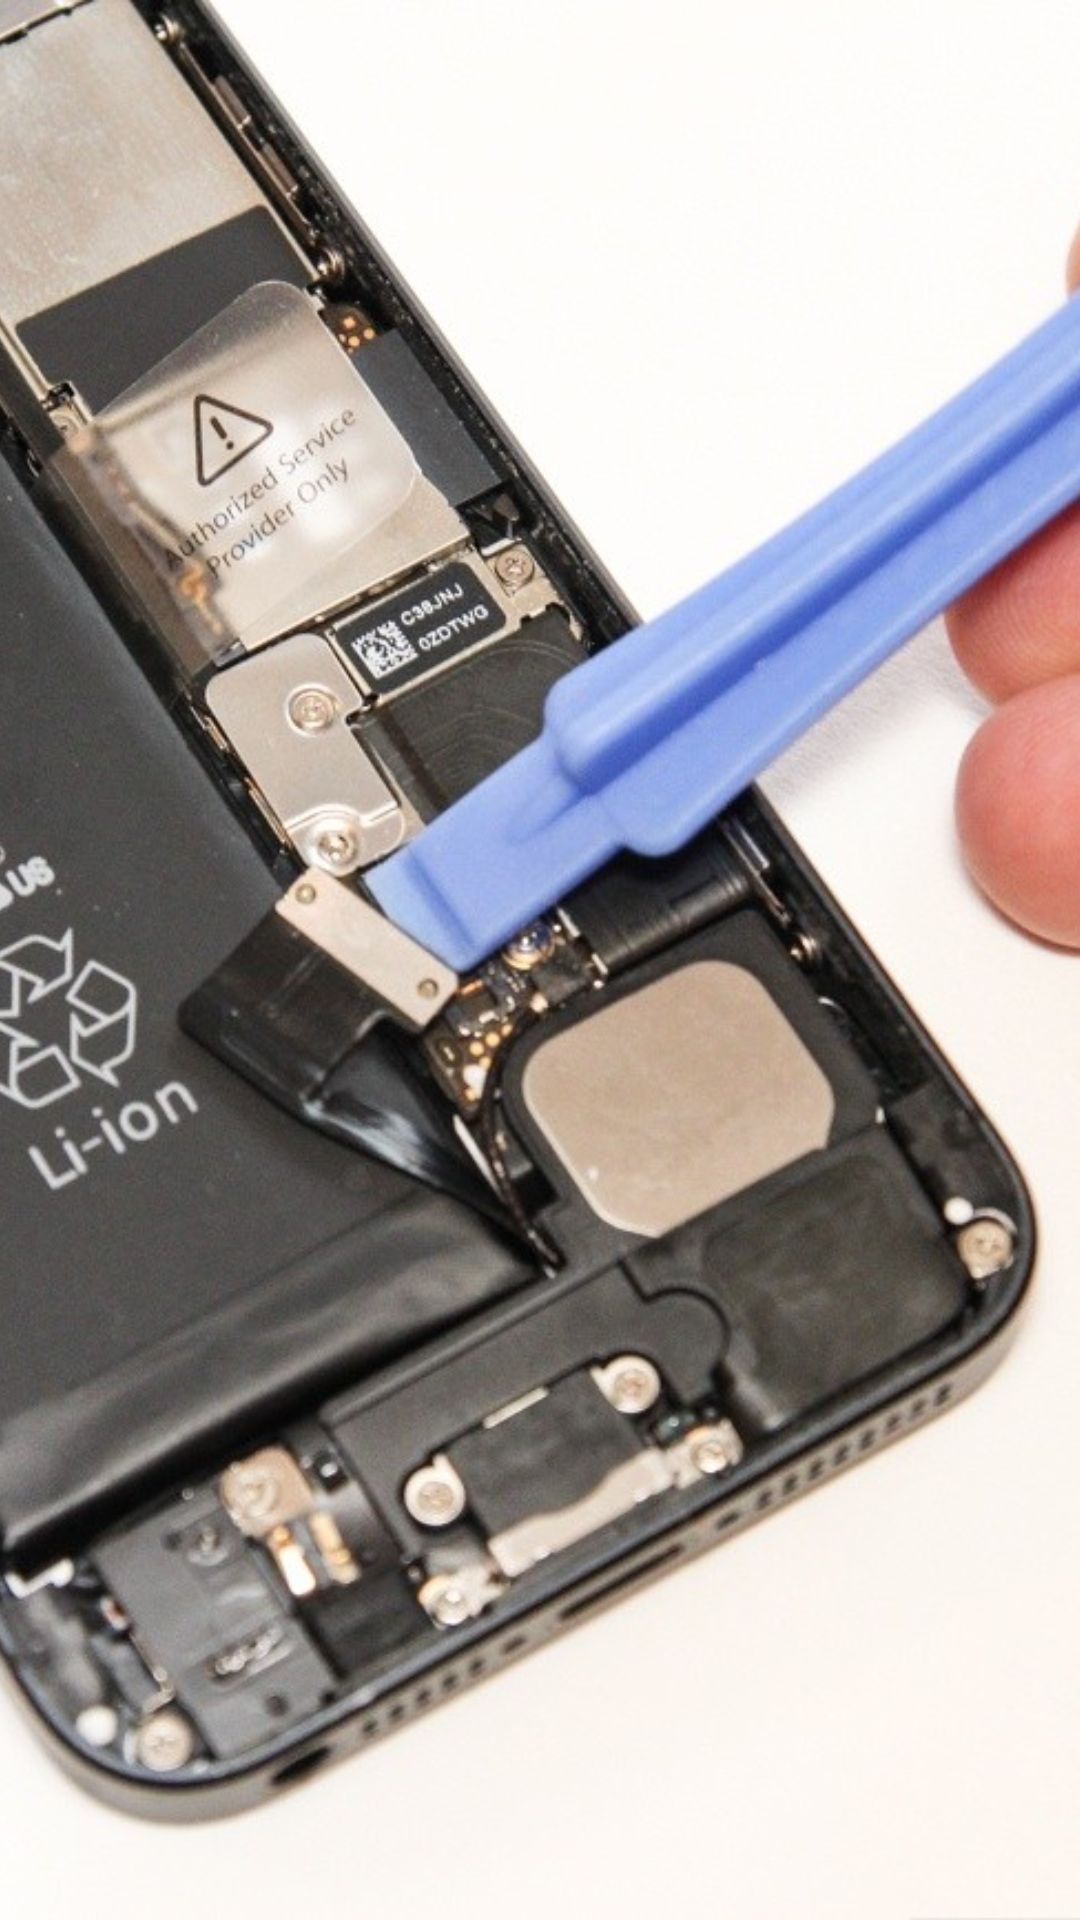 Why do smartphones have a non-removal battery these days? Here are